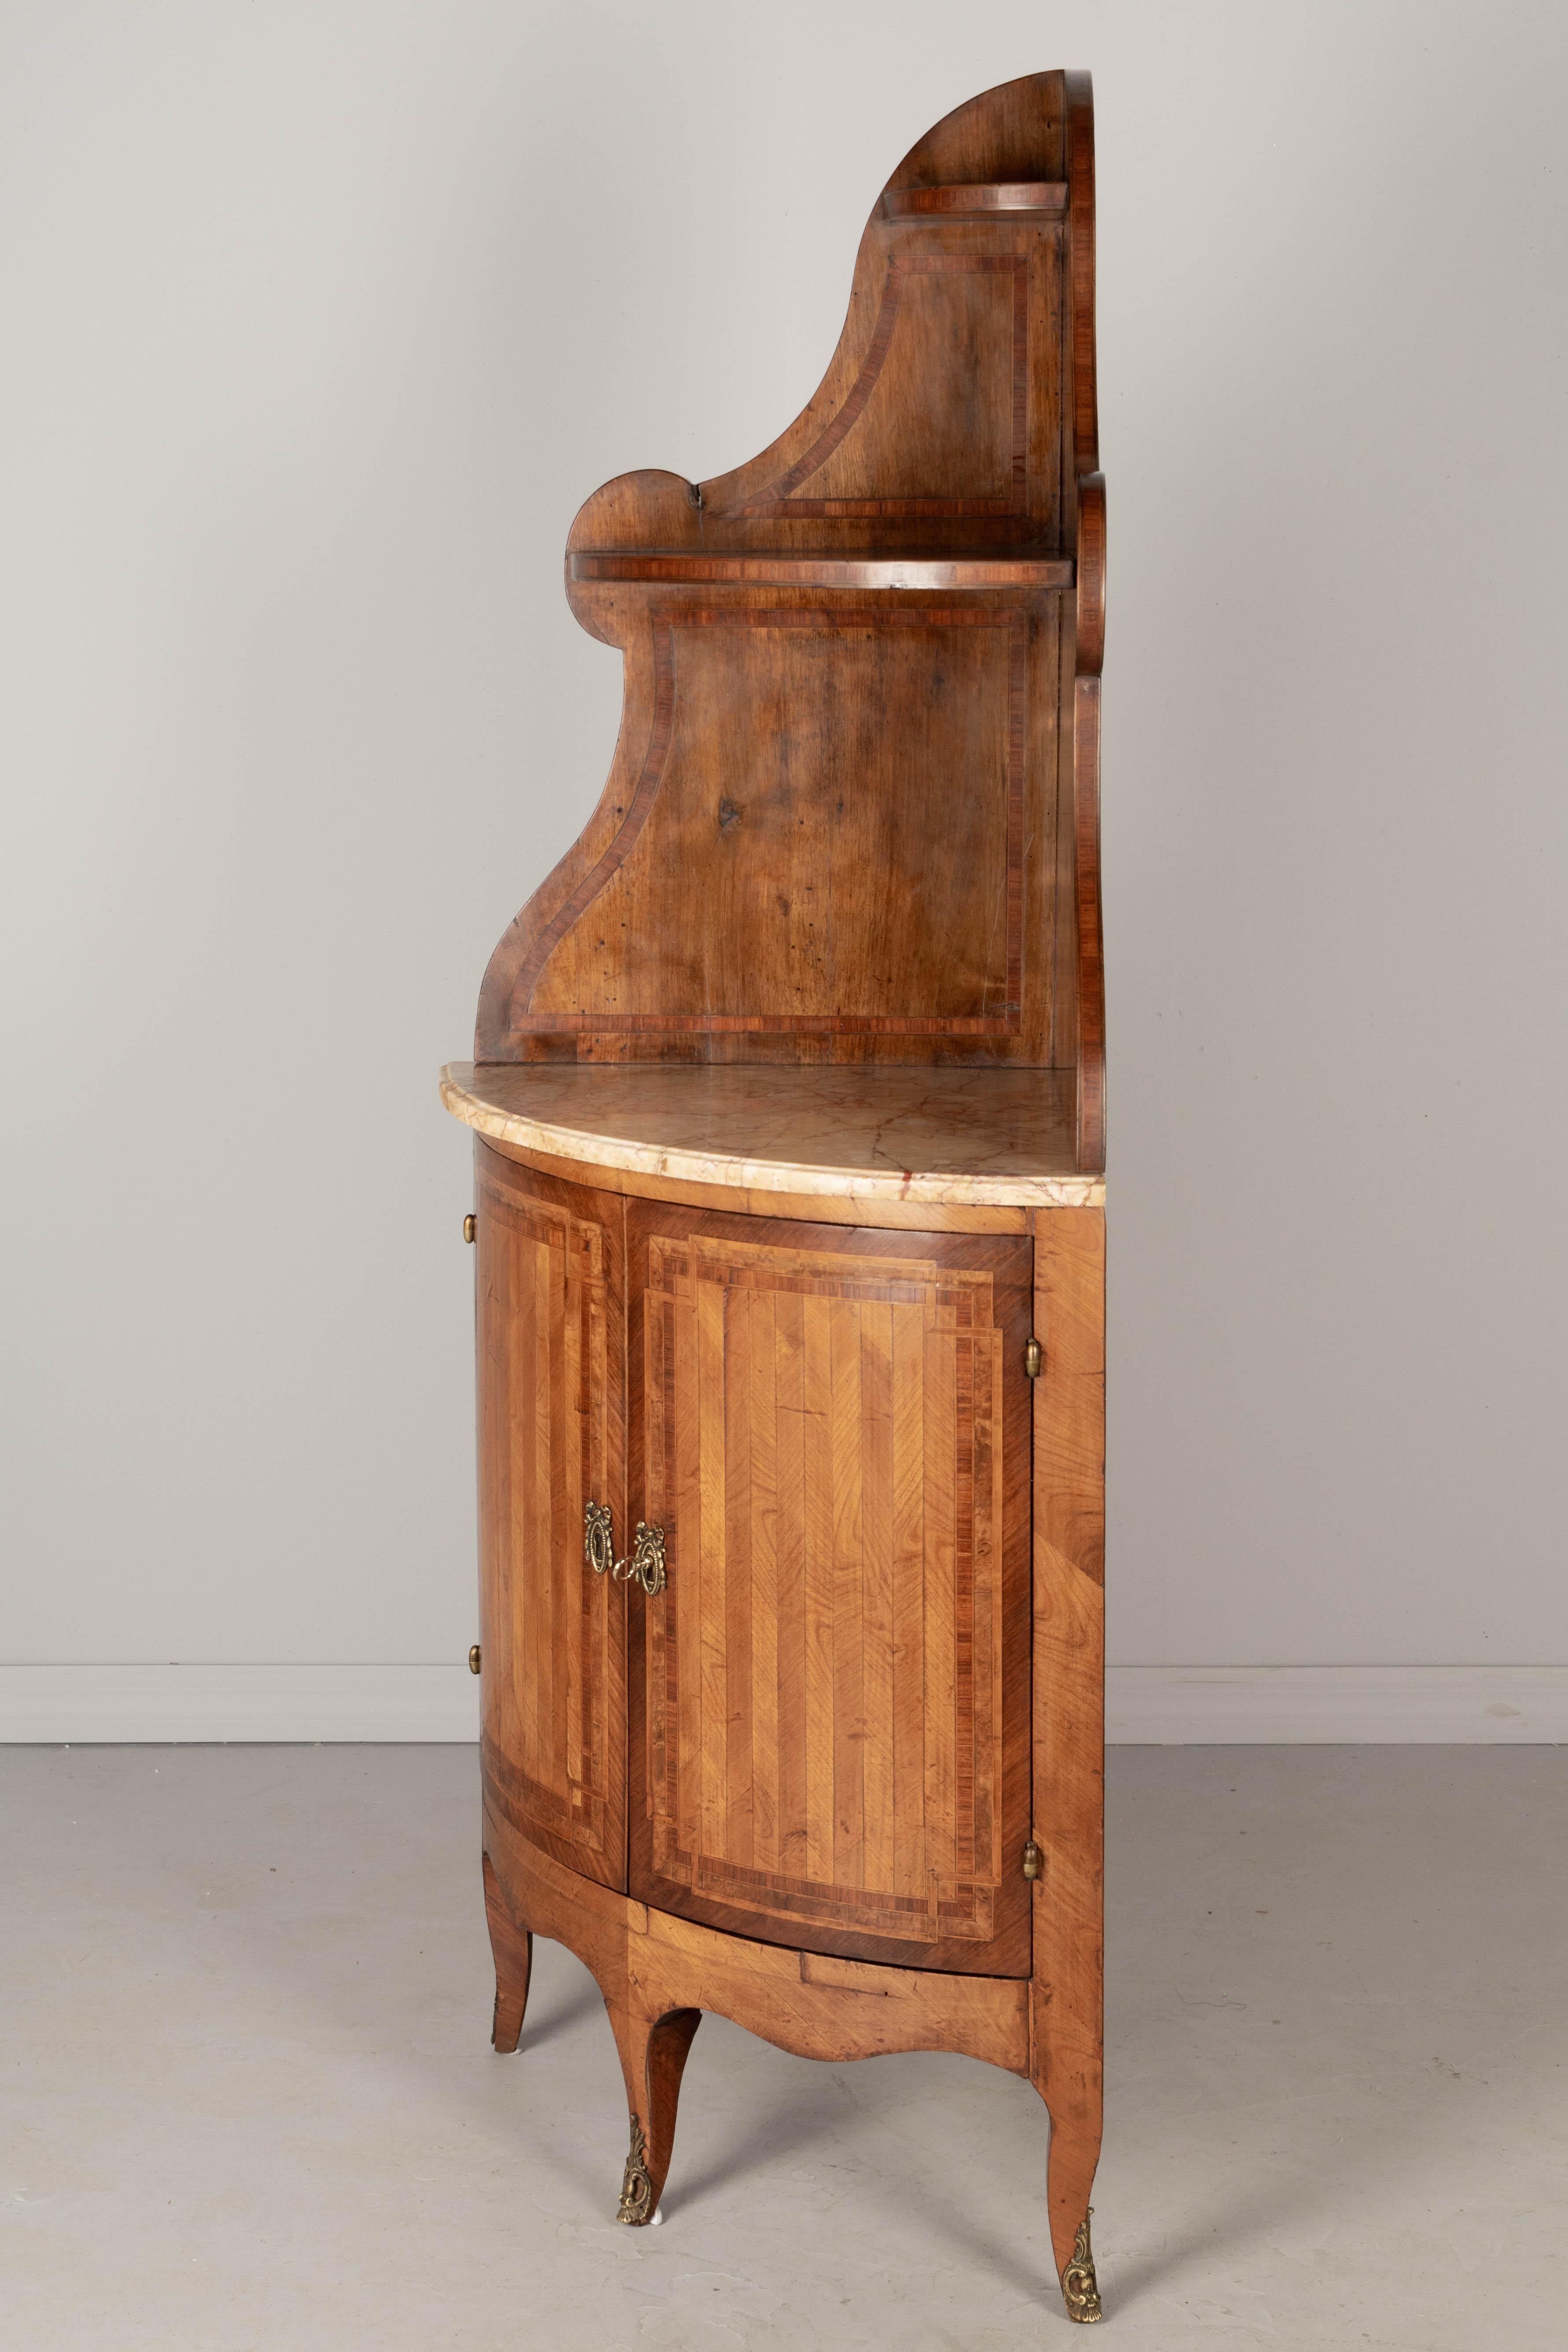 19th Century French Louis XVI Style Marquetry Corner Cabinet In Good Condition For Sale In Winter Park, FL